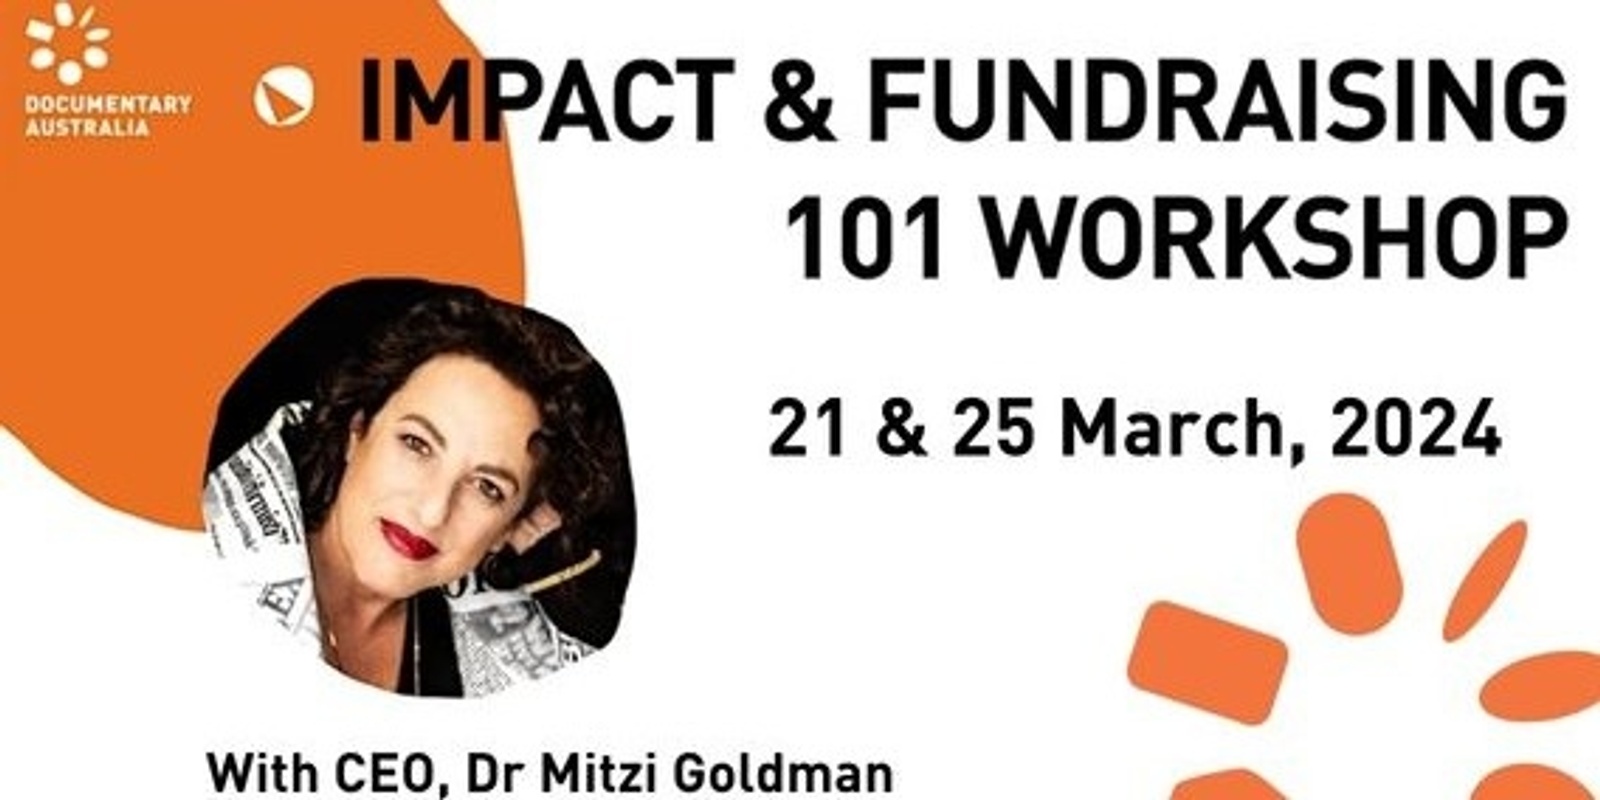 Banner image for Impact & Fundraising 101 for Documentary